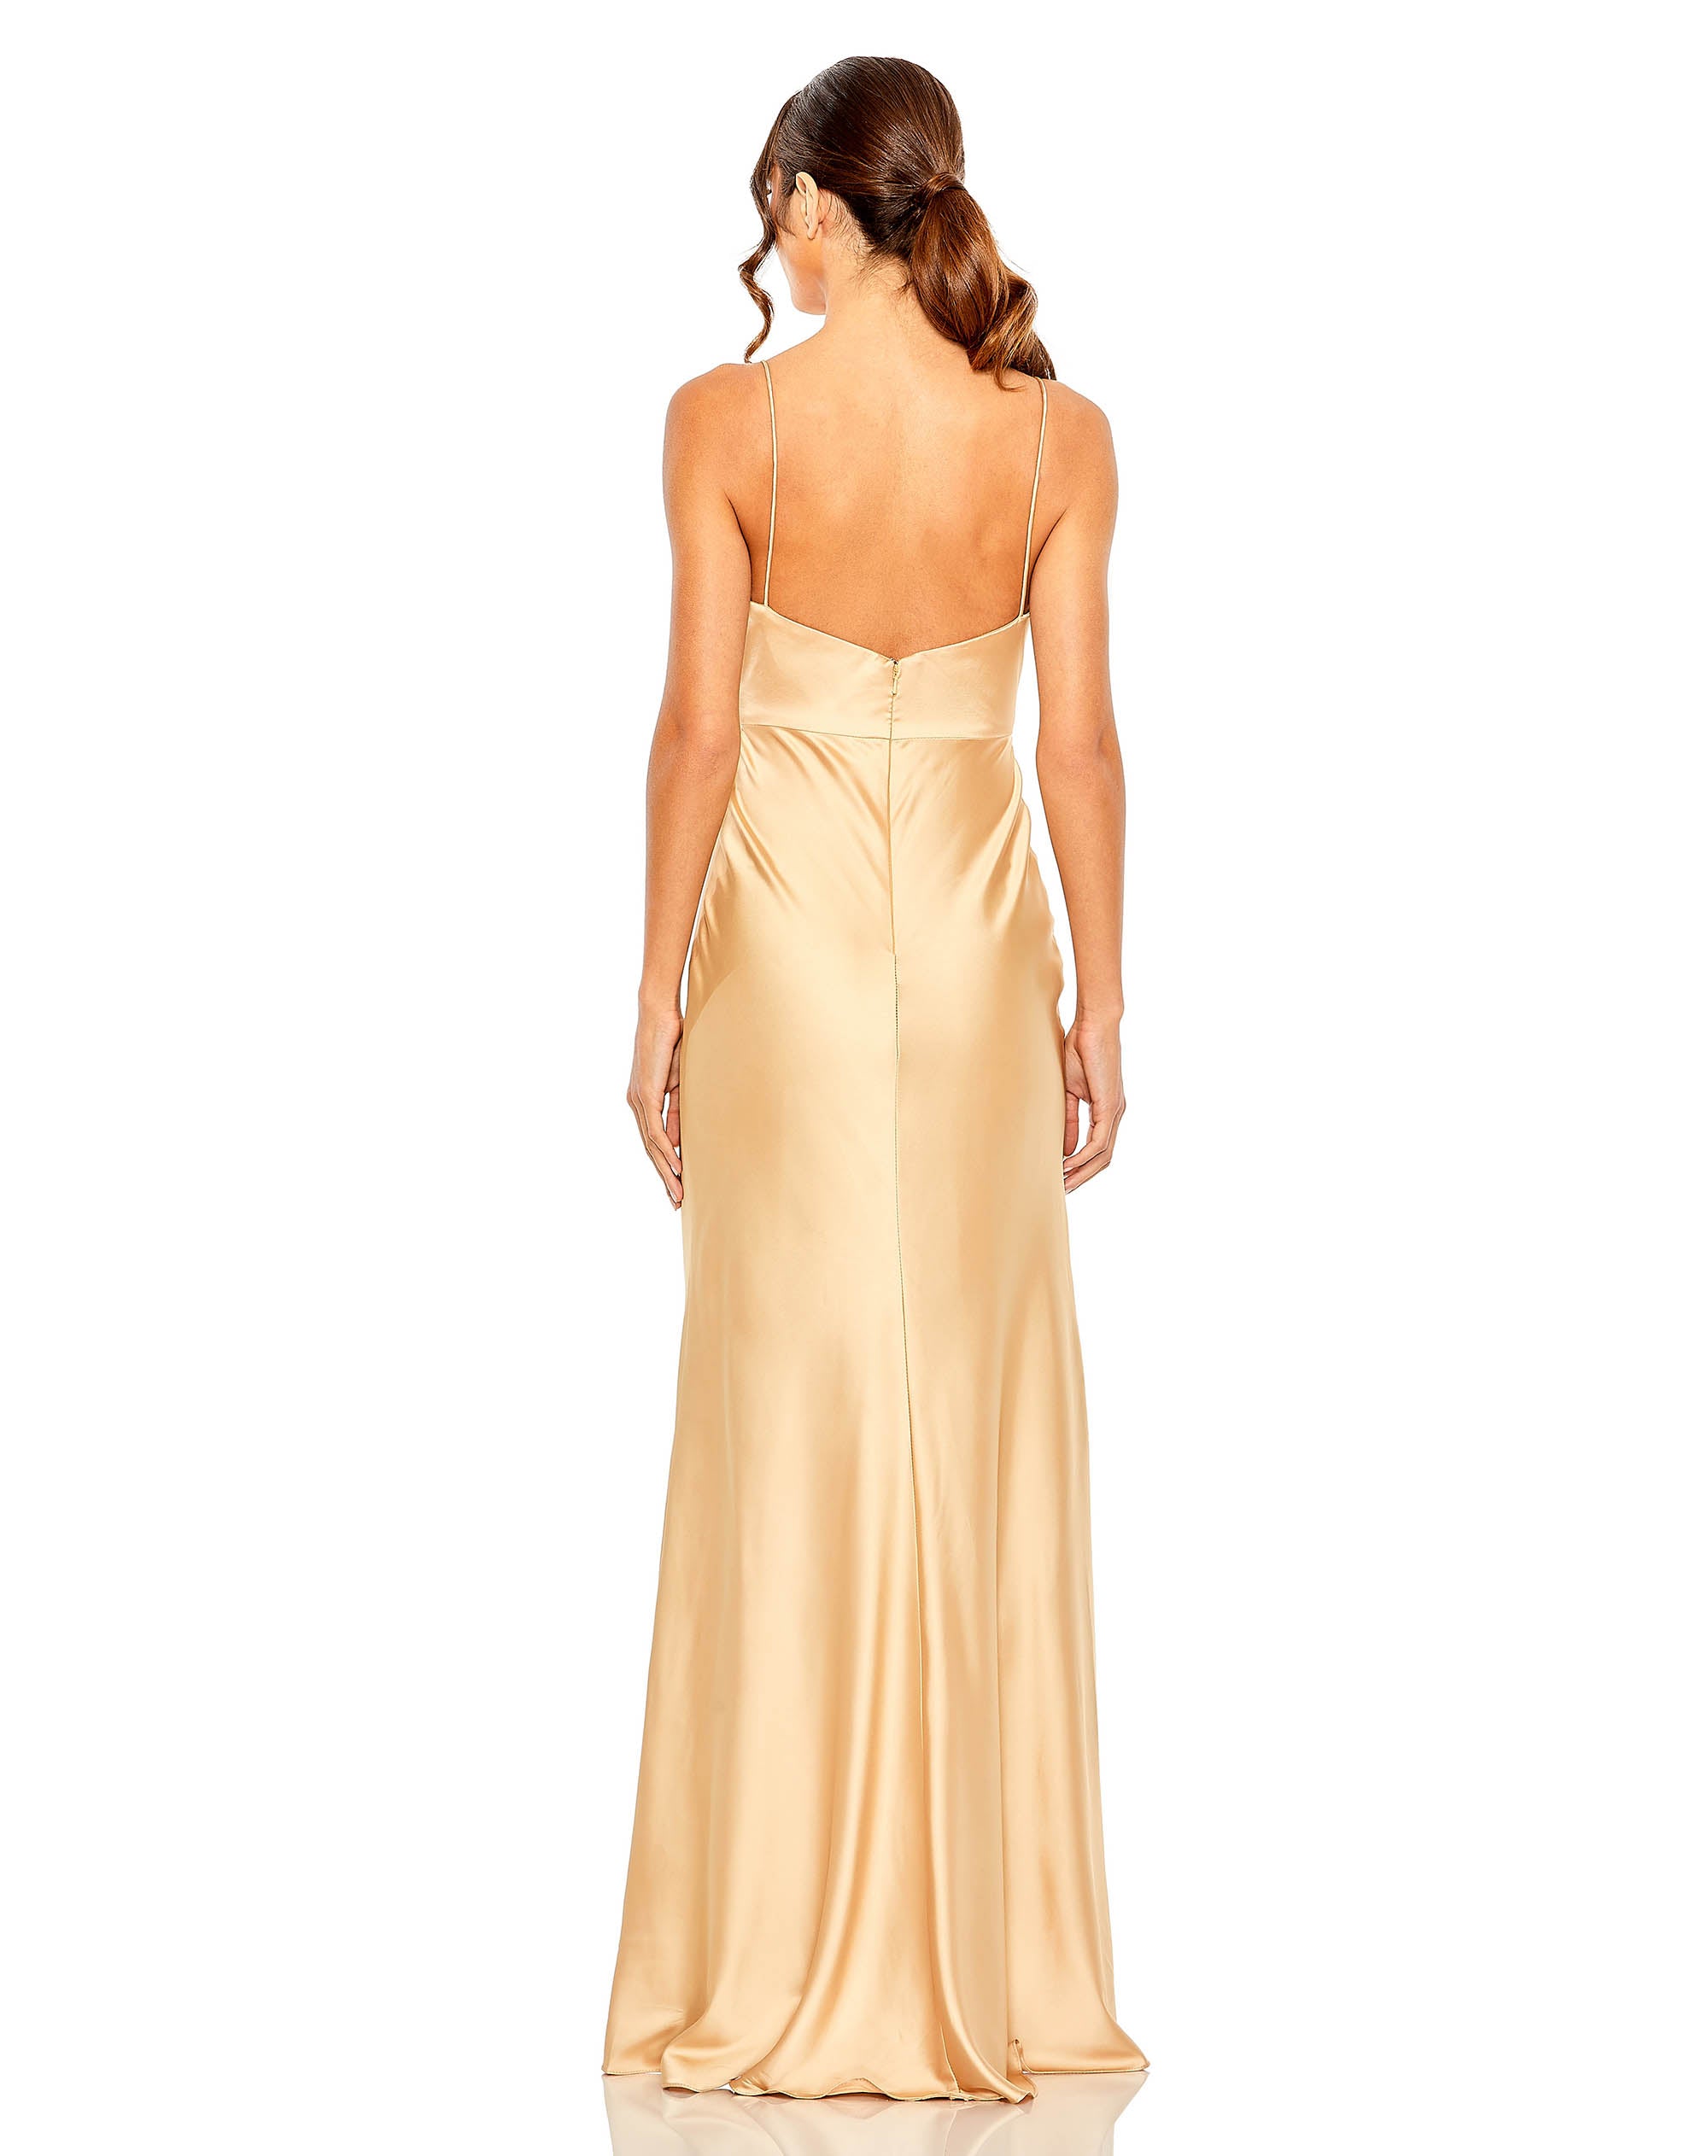 Tie Front with Keyhole Detail Gown